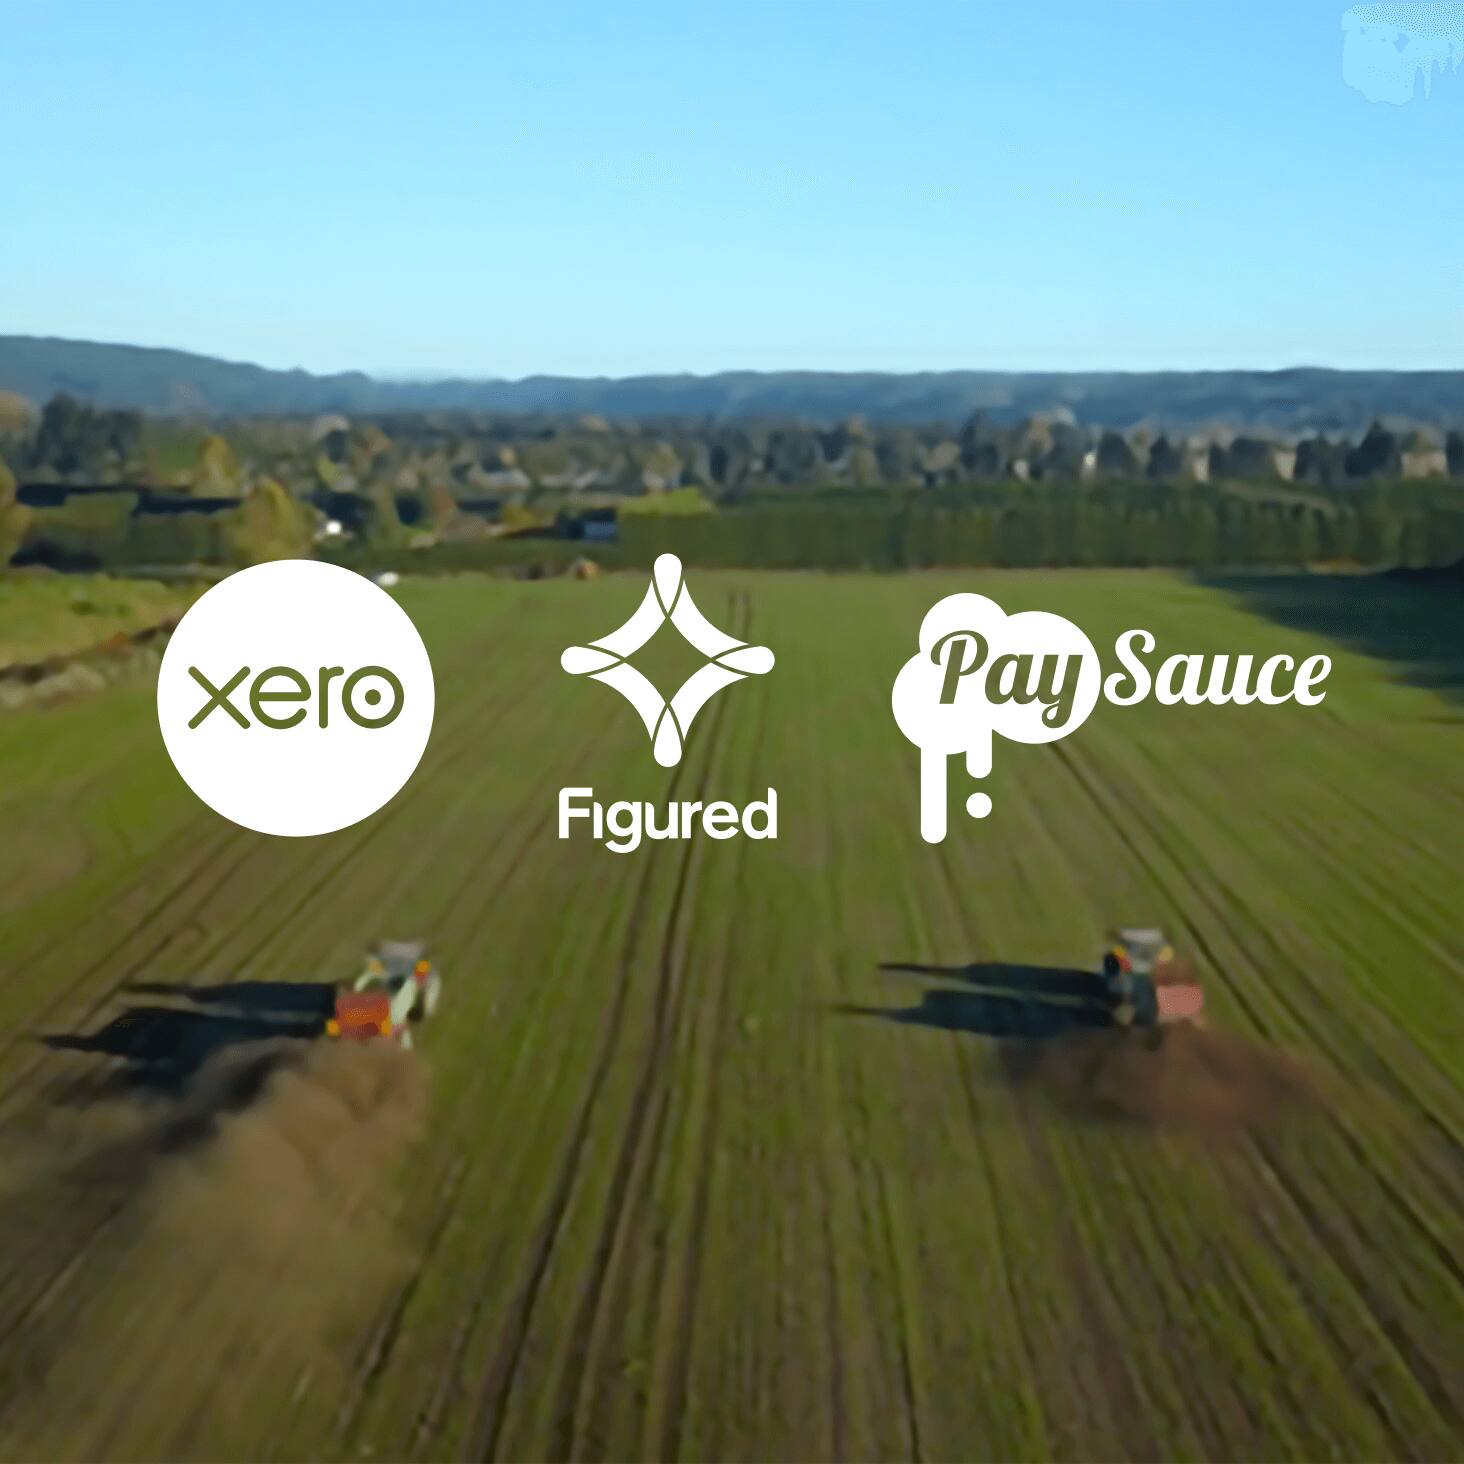 The Xero, Figured and PaySauce logos display on a photo of a field being plowed.